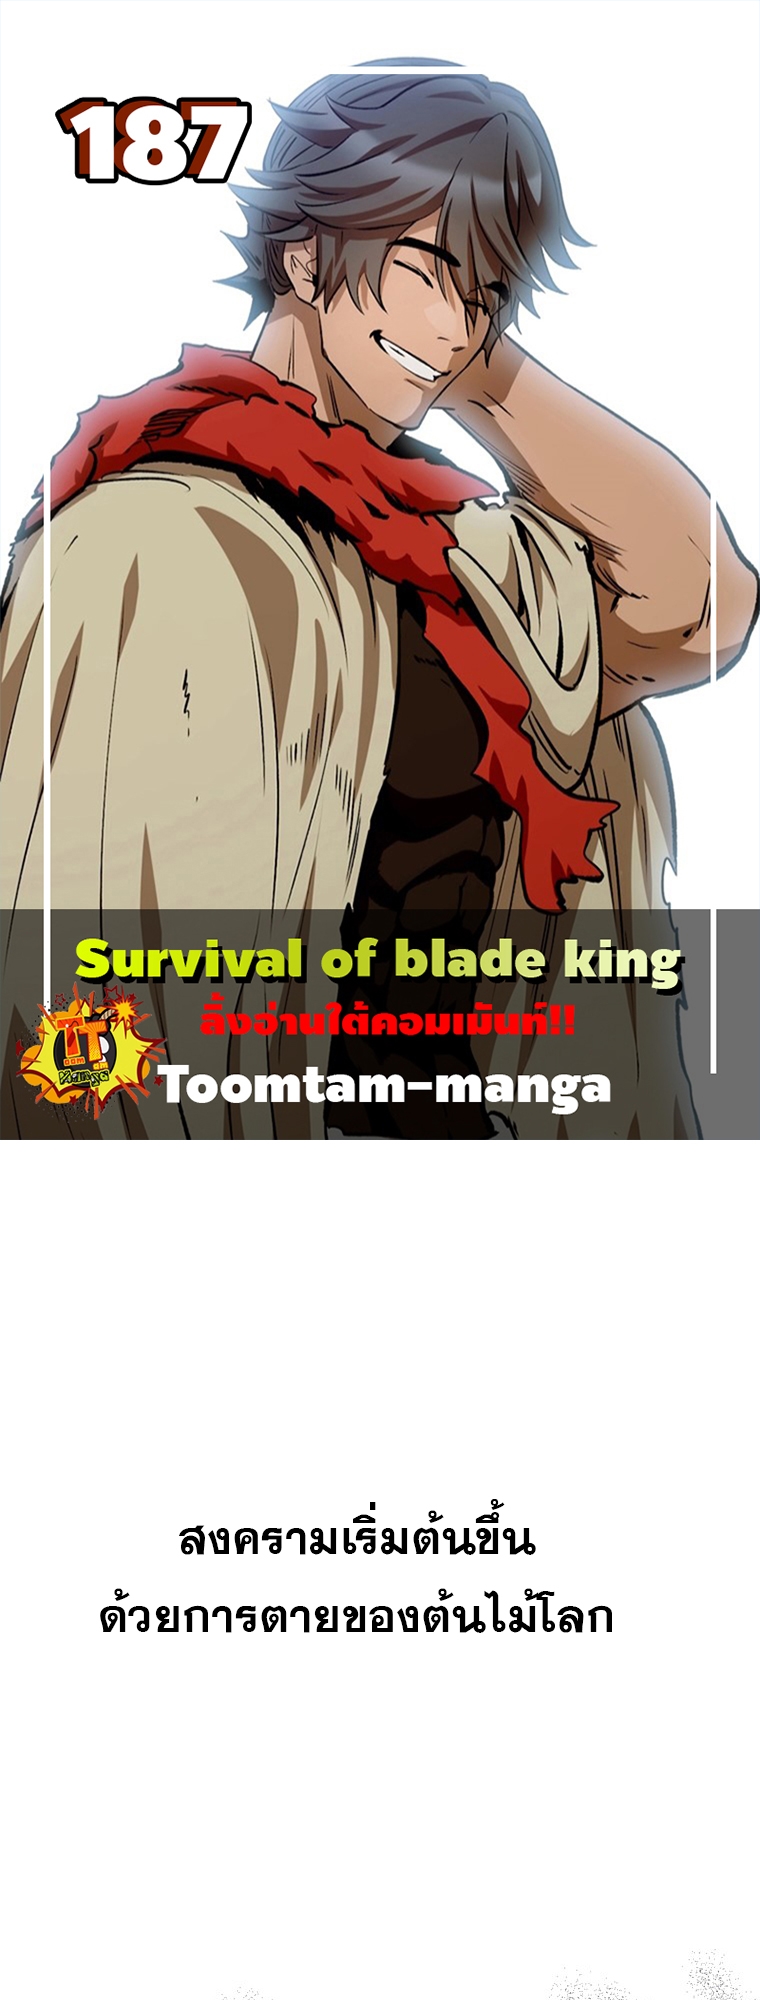 Survival of blade king 187 13 1 25670001